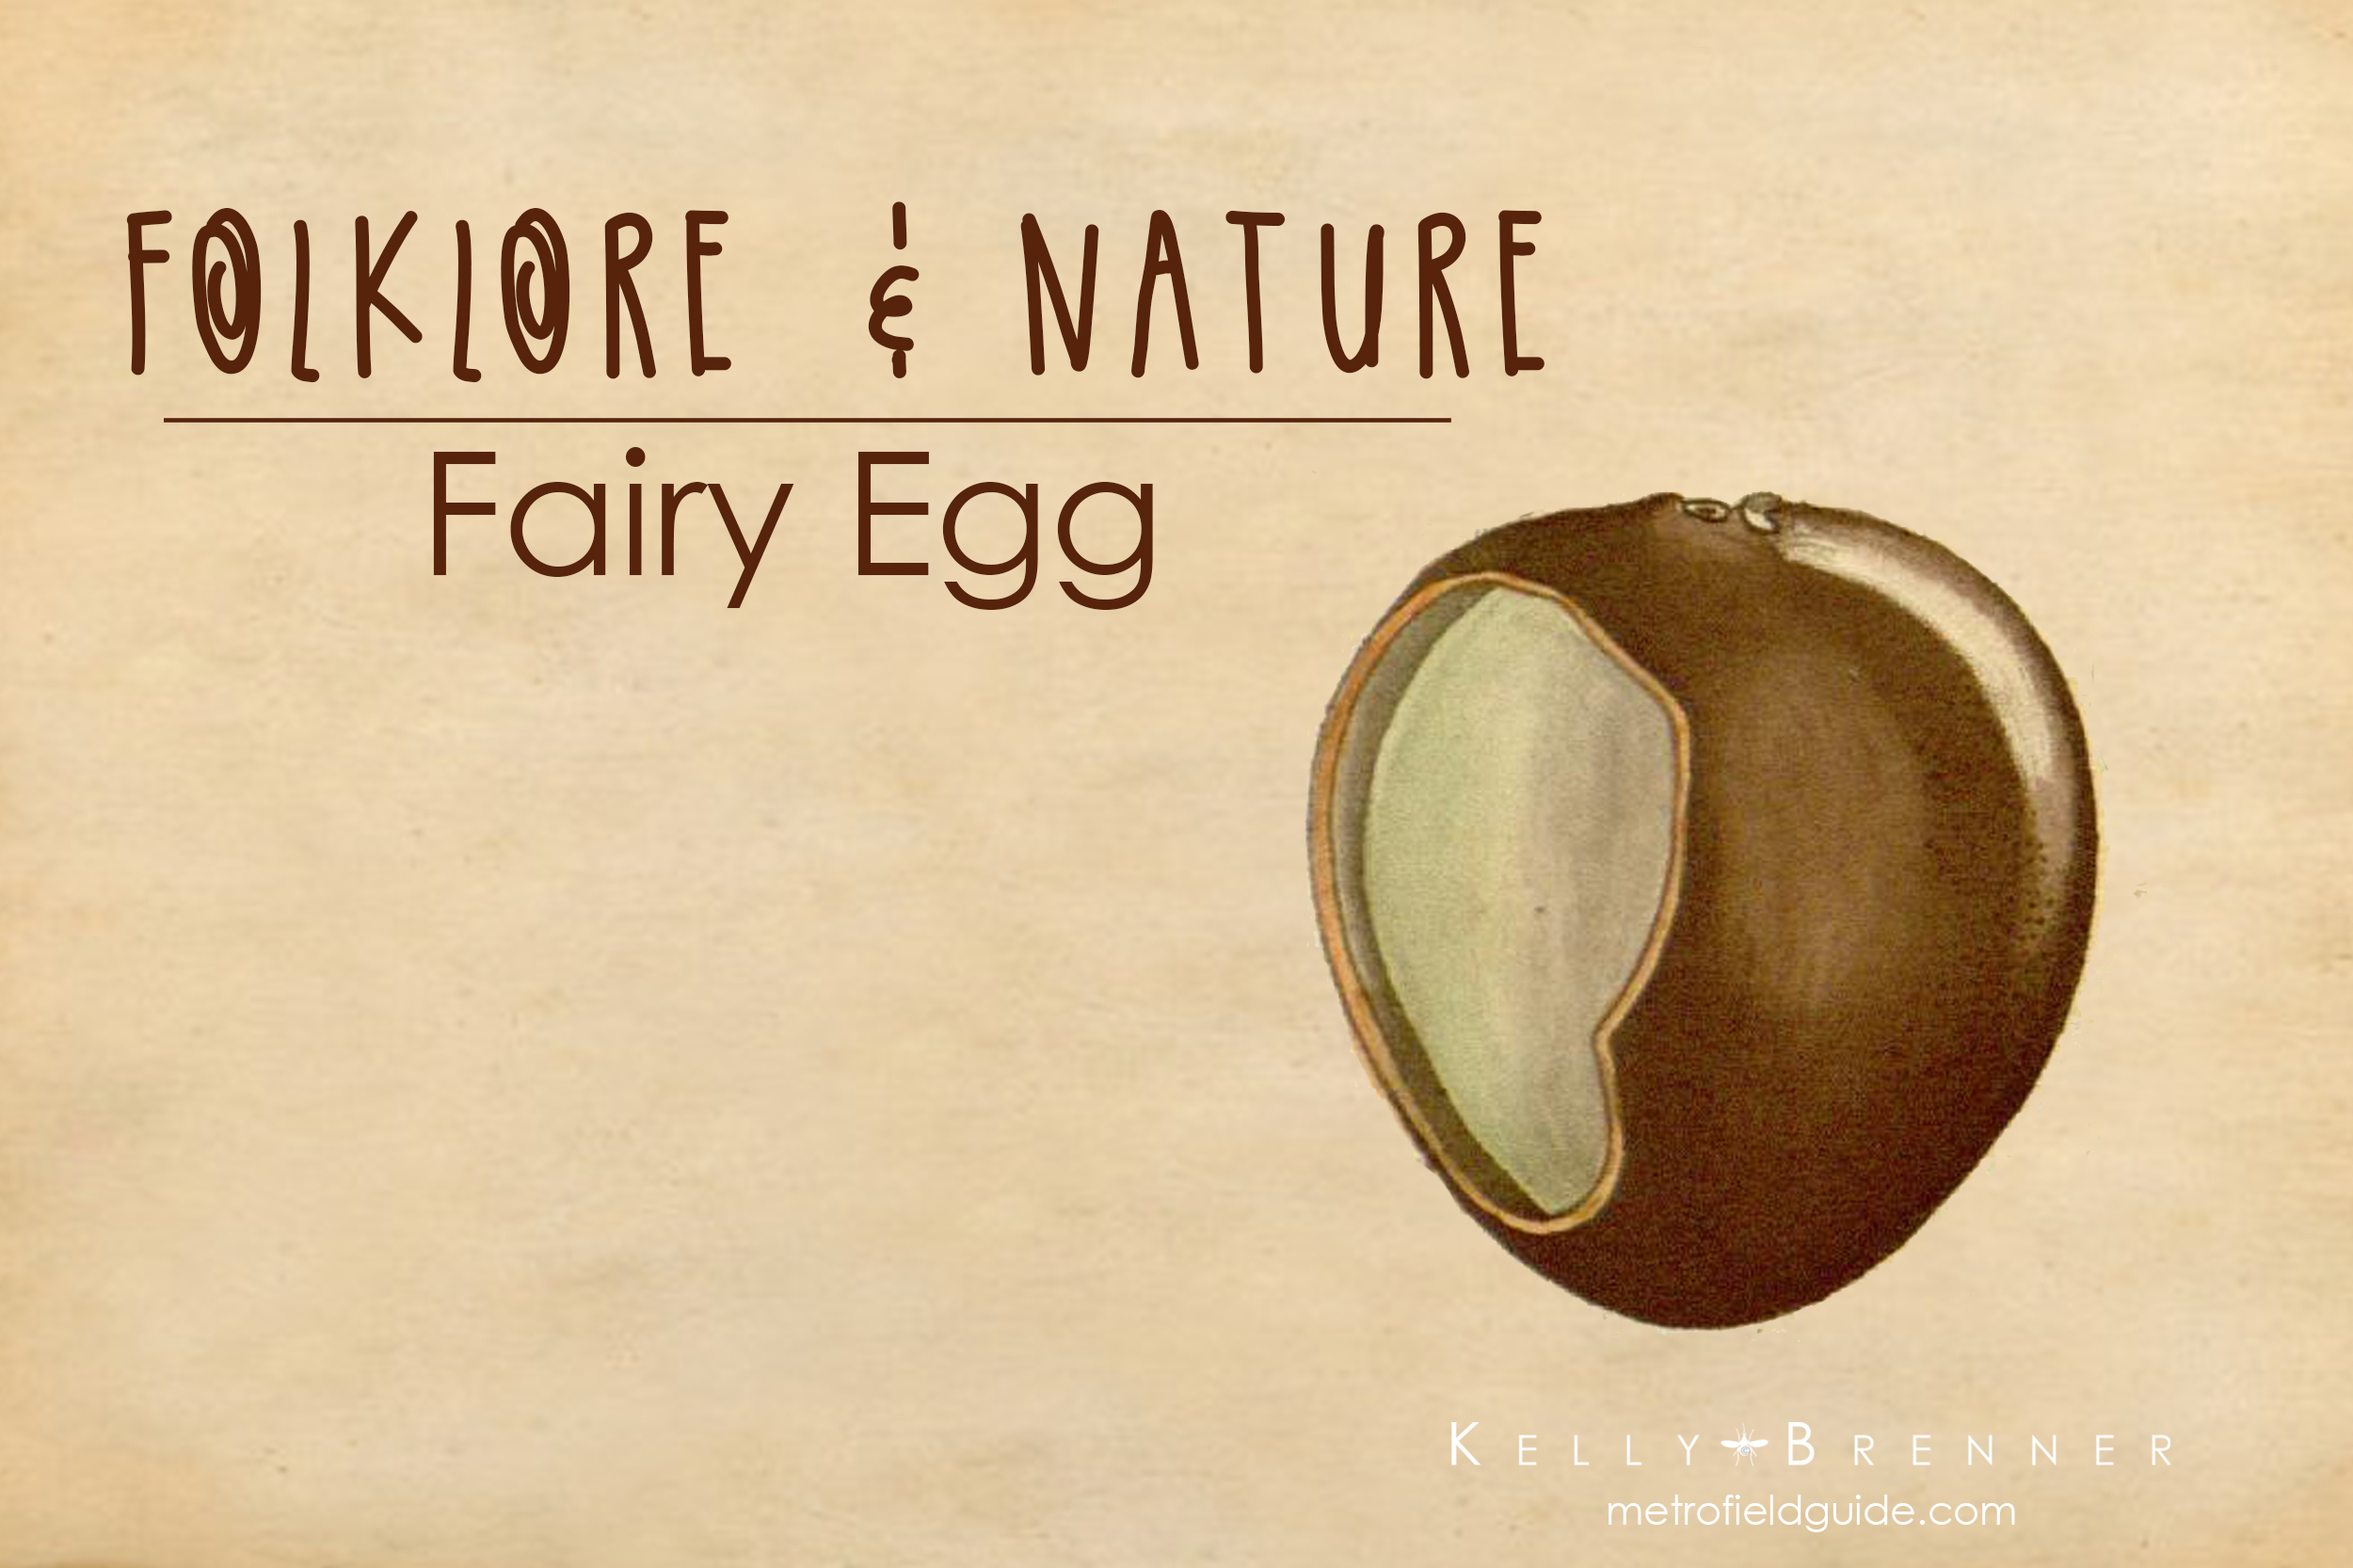 Folklore & Nature: The Fairy Egg